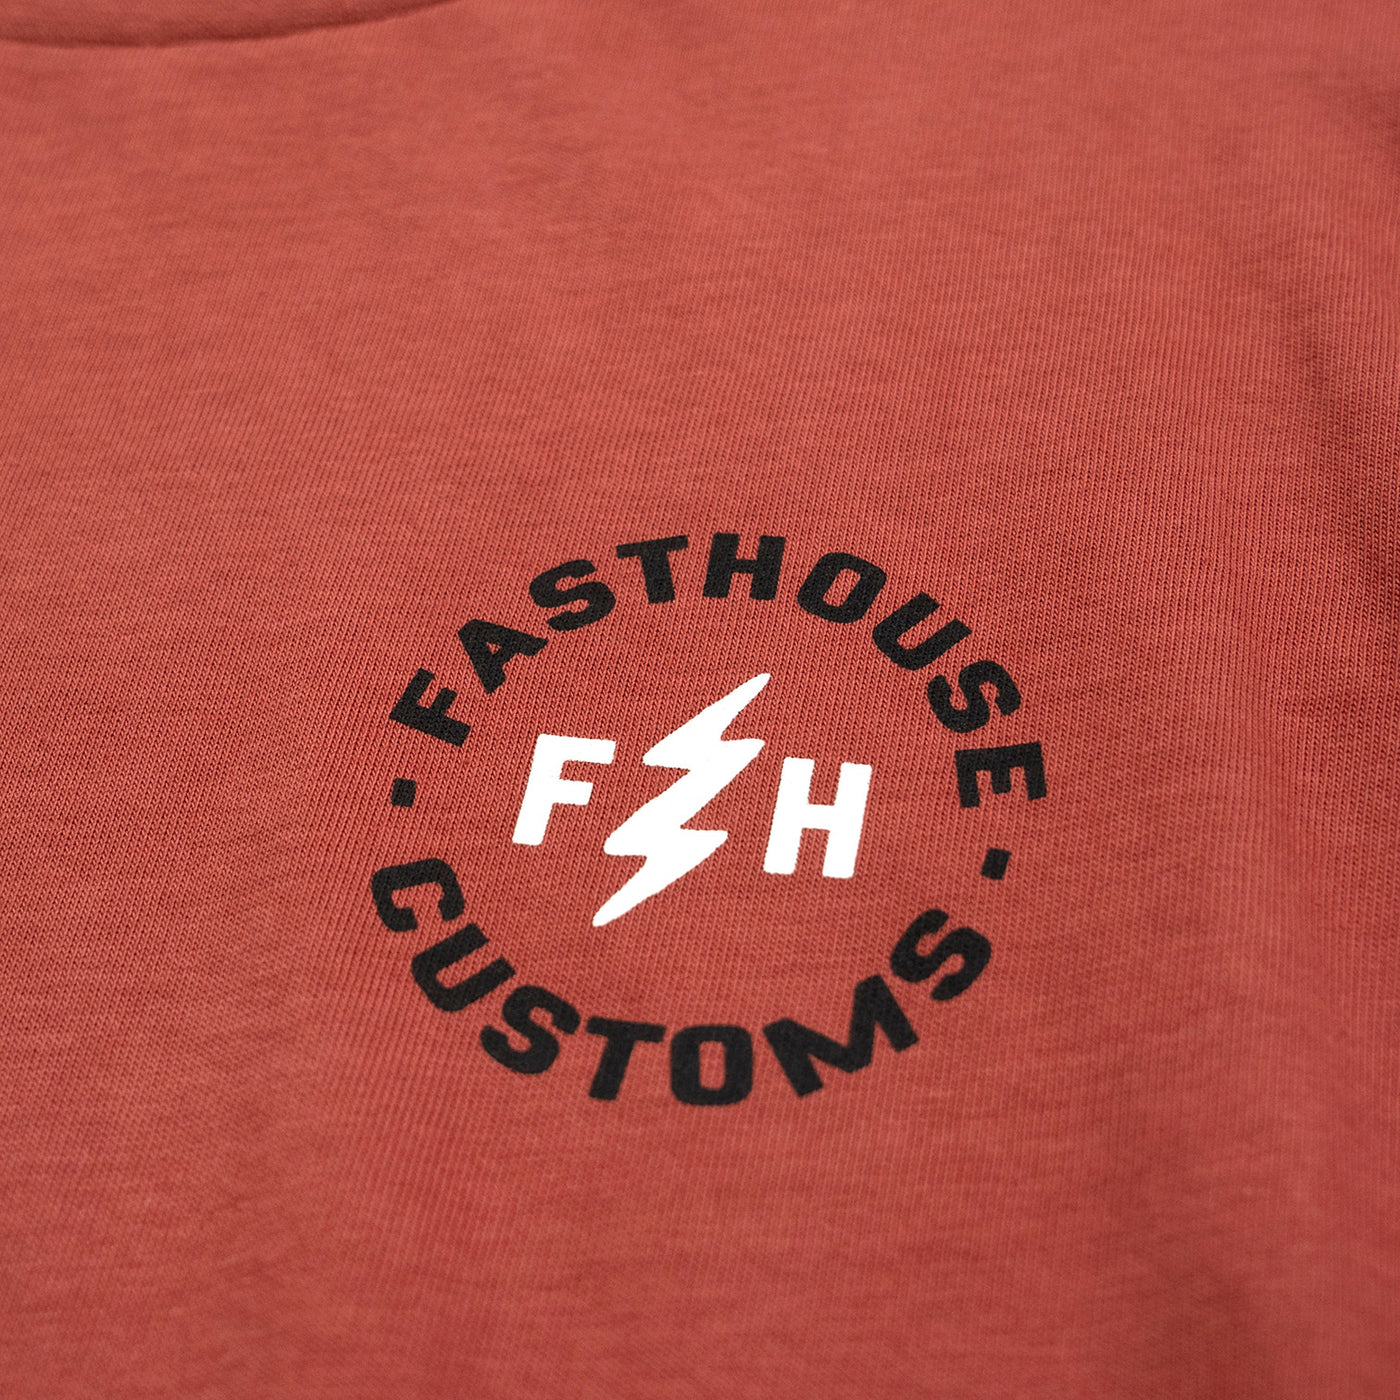 Fasthouse Easy Rider Long Sleeve Tee